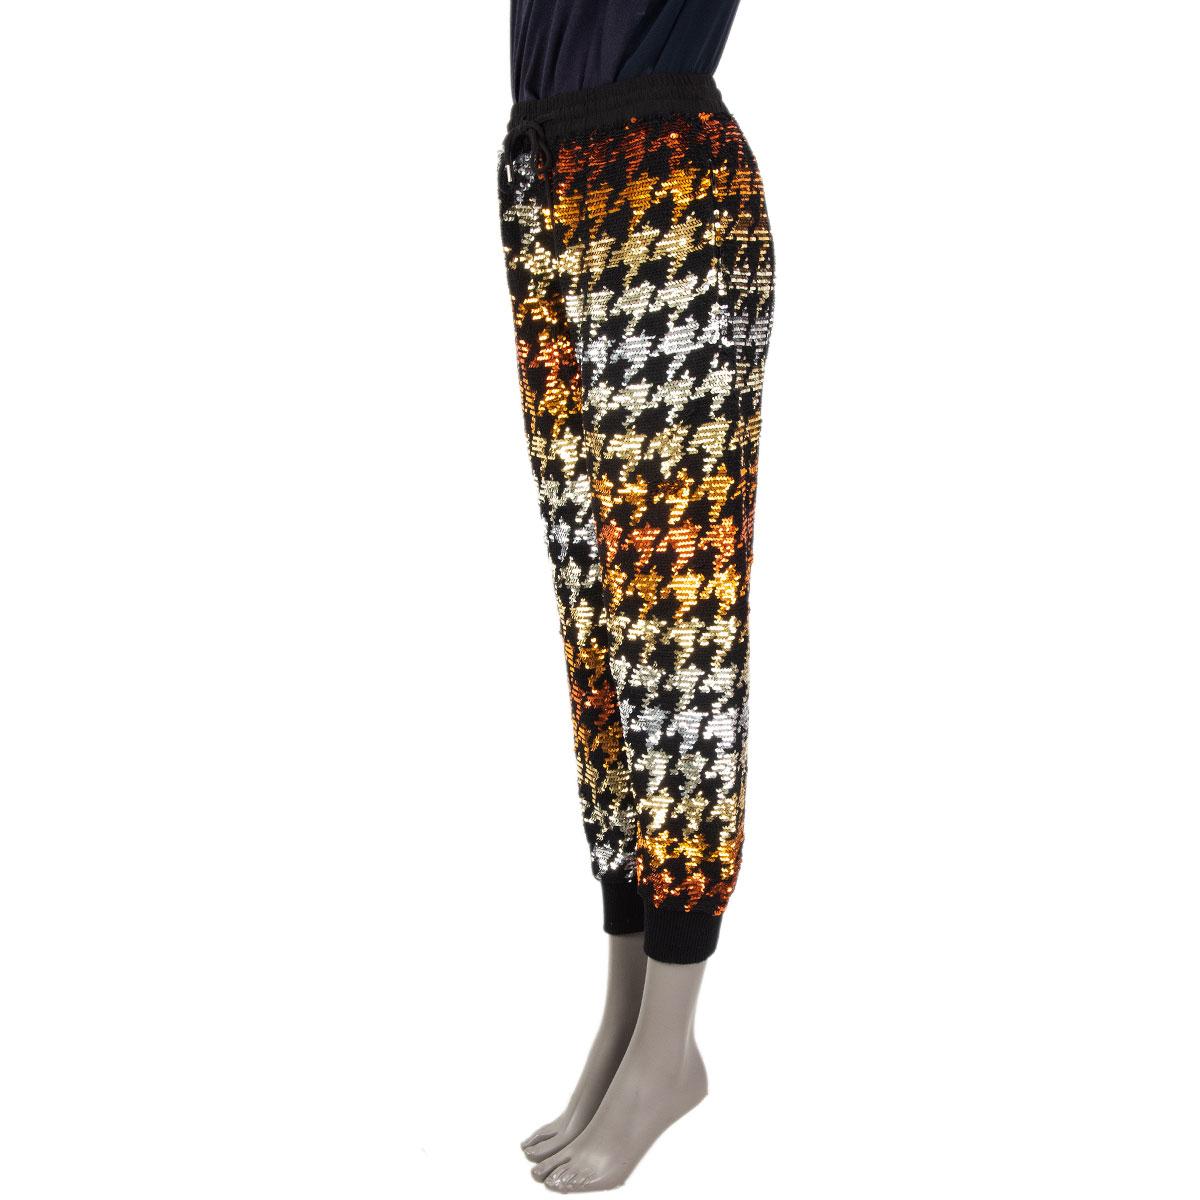 100% authentic Ashish houndstooth track pants in multicolor sequins. Has two front zip pockets. Drawstring closue. Lined in silk (assumingly as tag is missing). Have been worn and are in excellent condition. 

Measurements
Tag